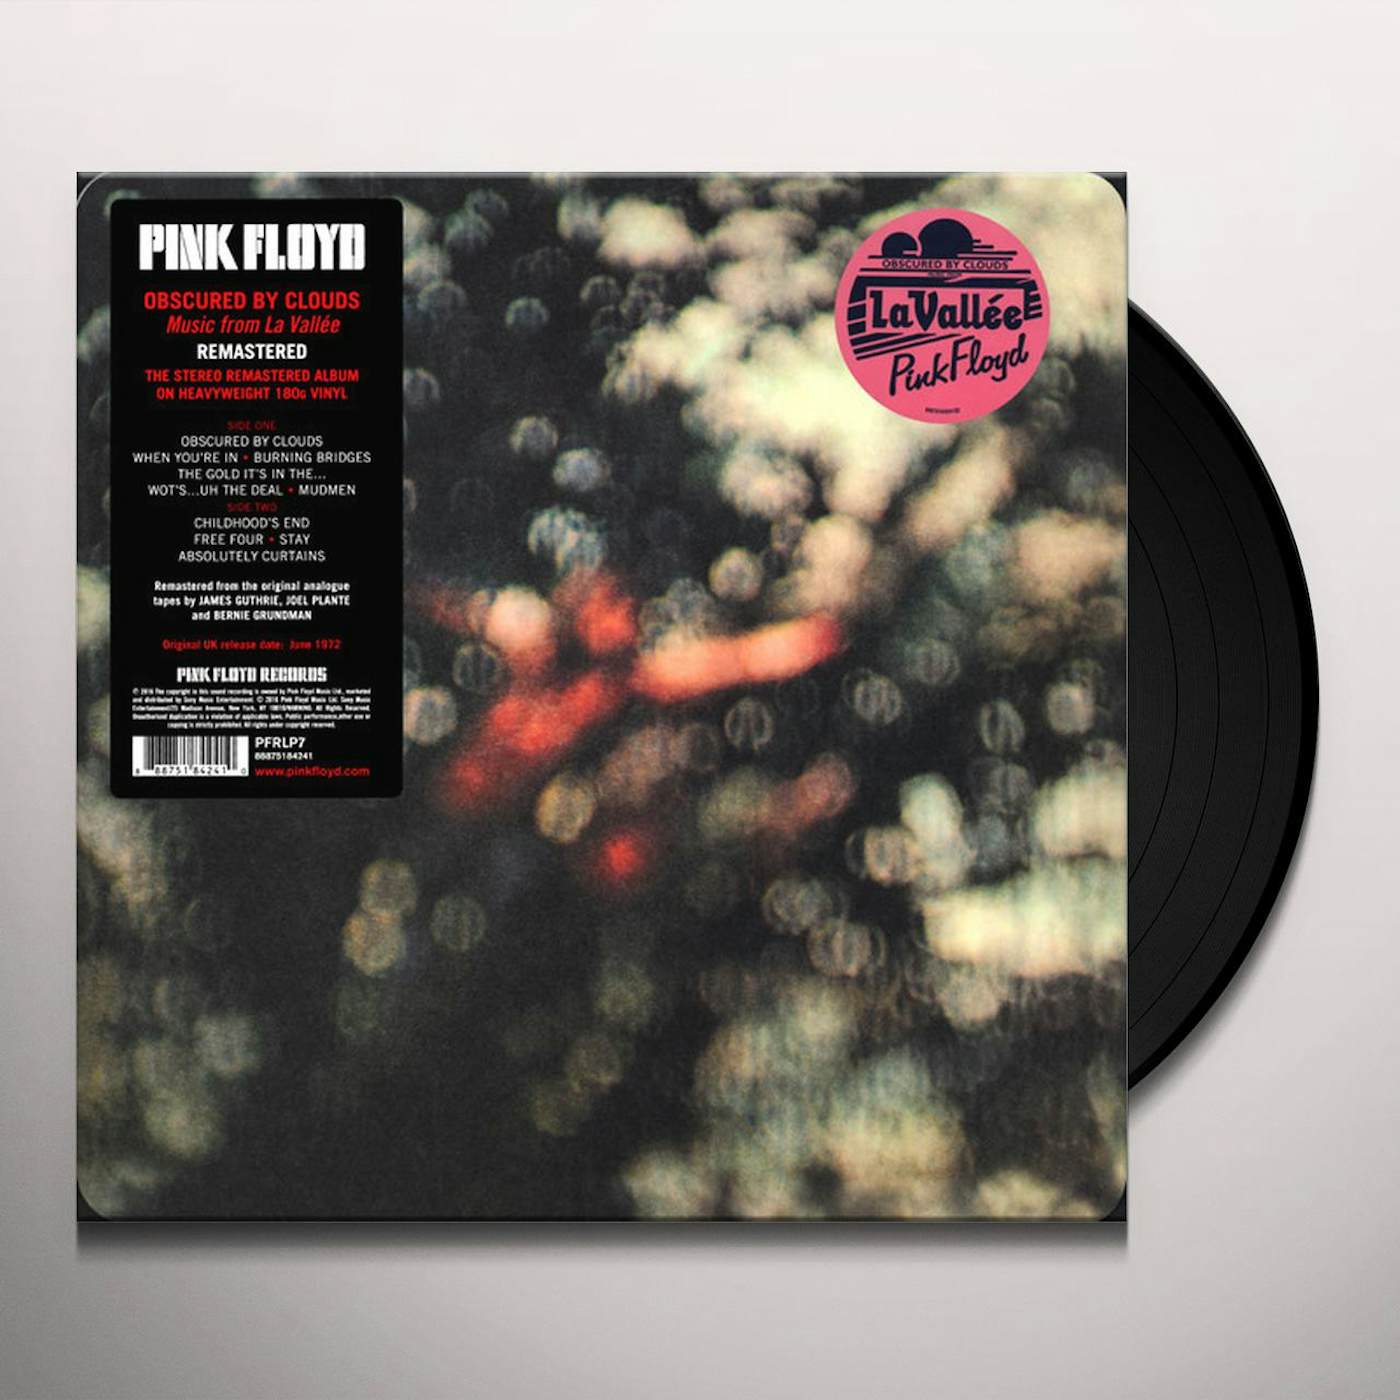 Pink Floyd Obscured By Clouds CD  Shop the Pink Floyd Official Store